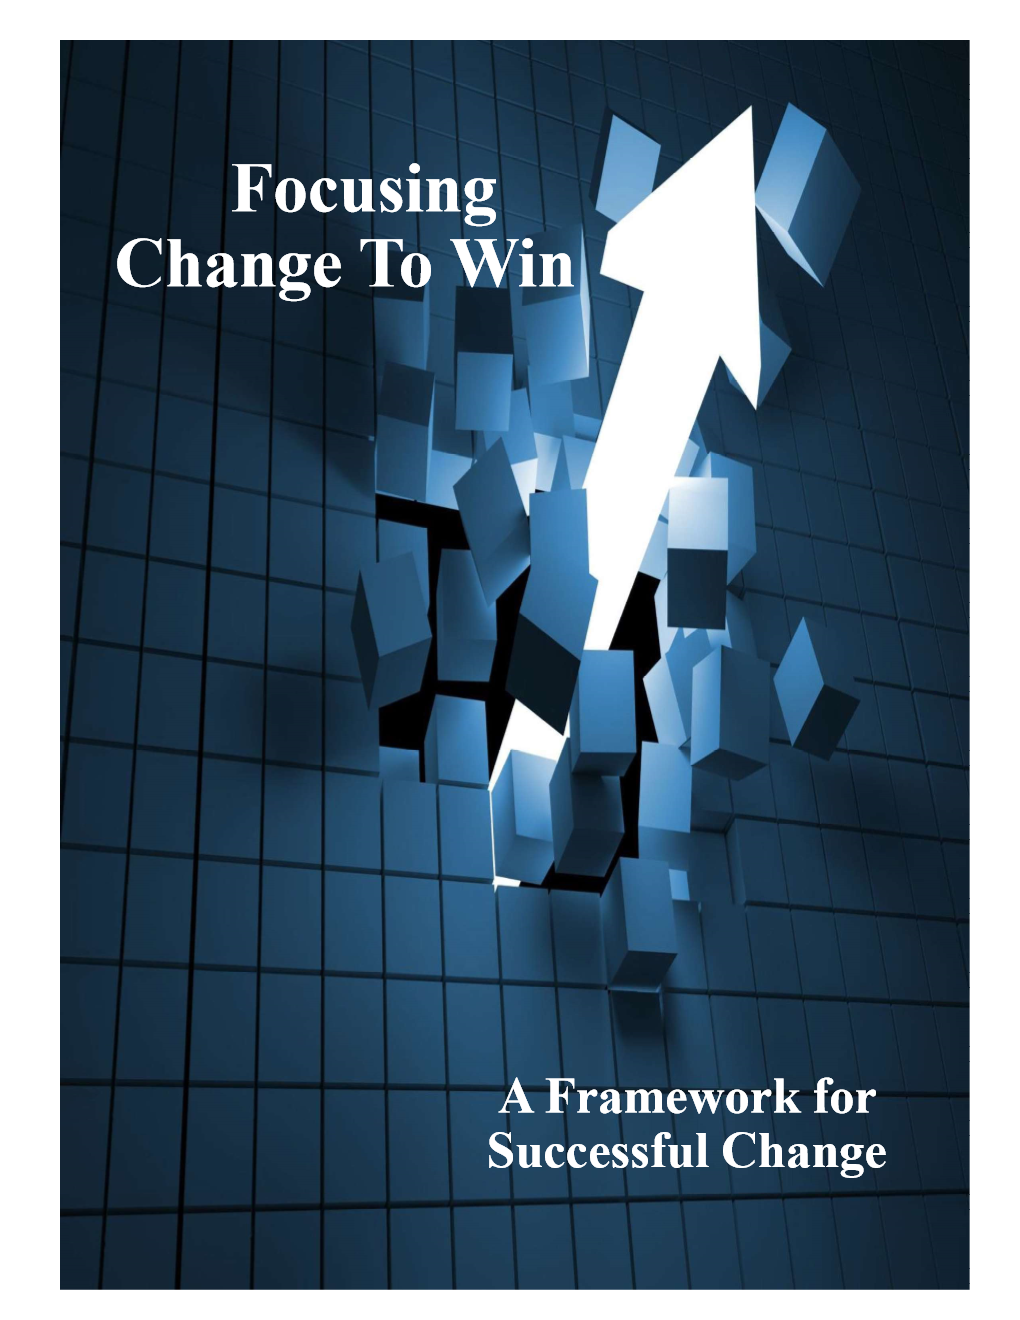 Focusing Change to Win Brochure Cover. 1 of 6